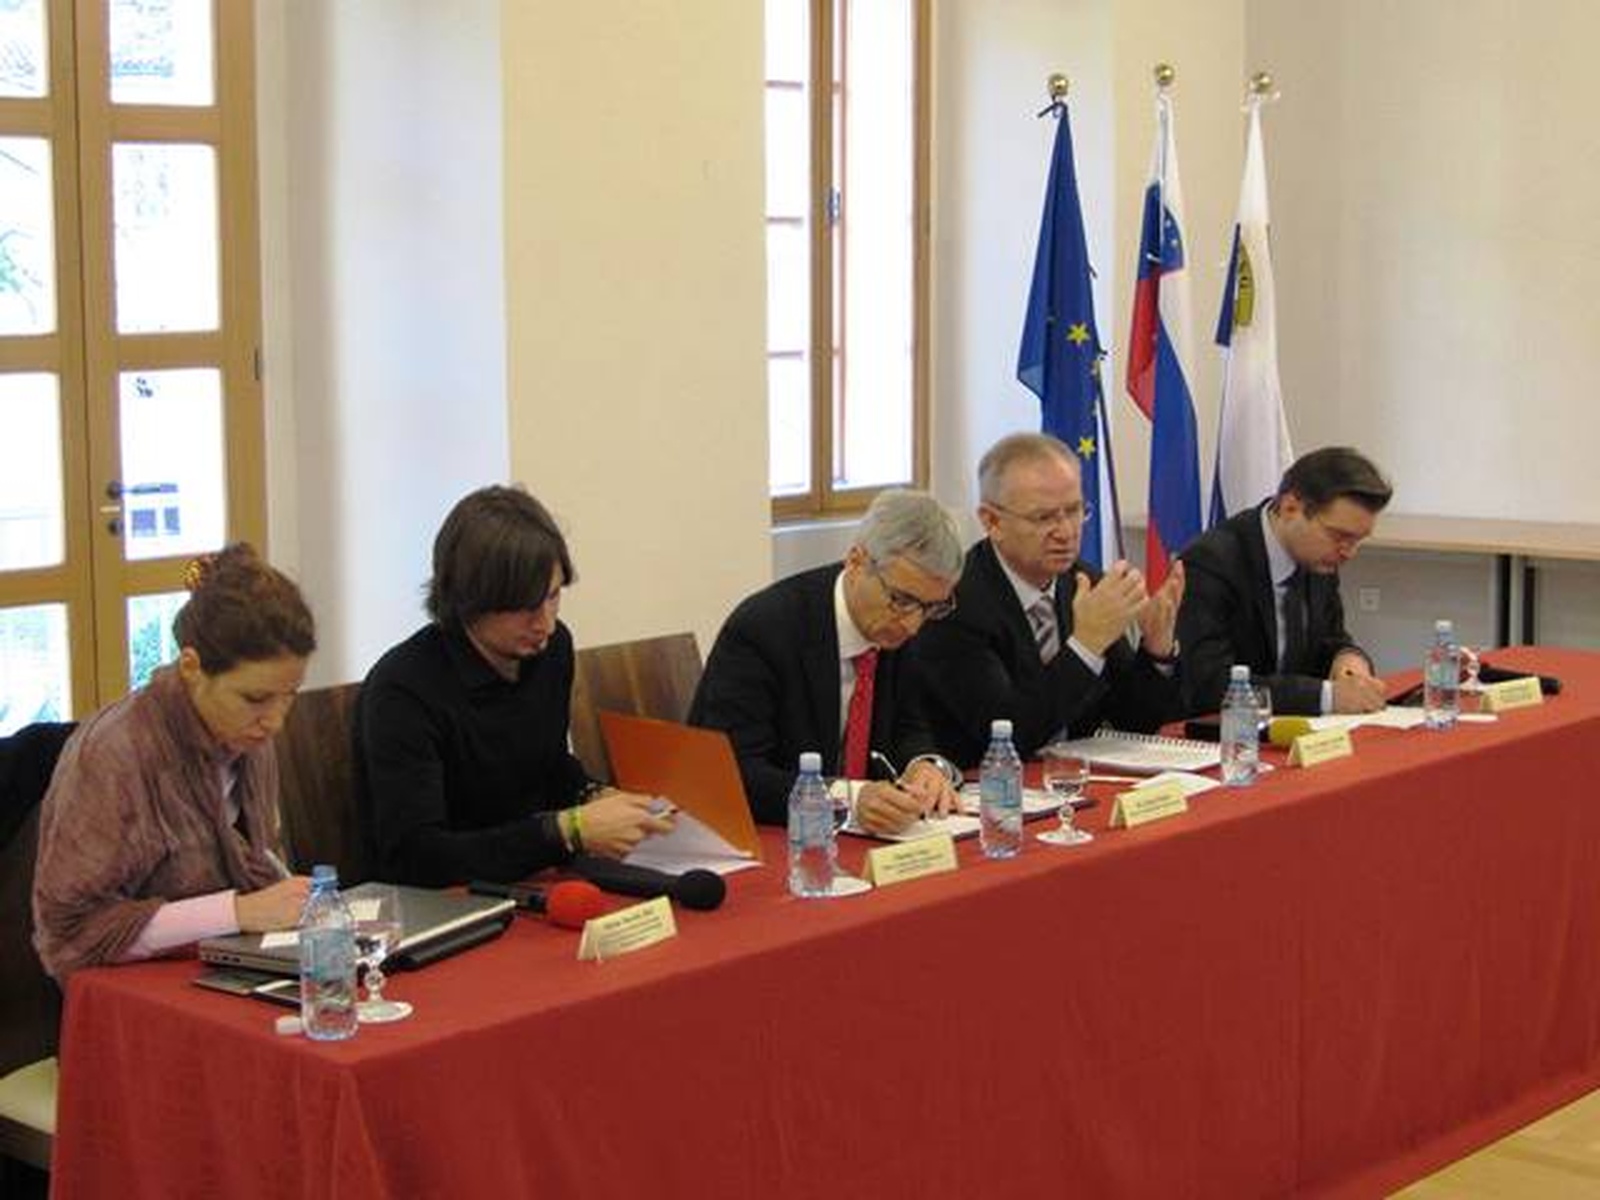 Consultation on the Amending Act in Higher Education Law at the University of Nova Gorica